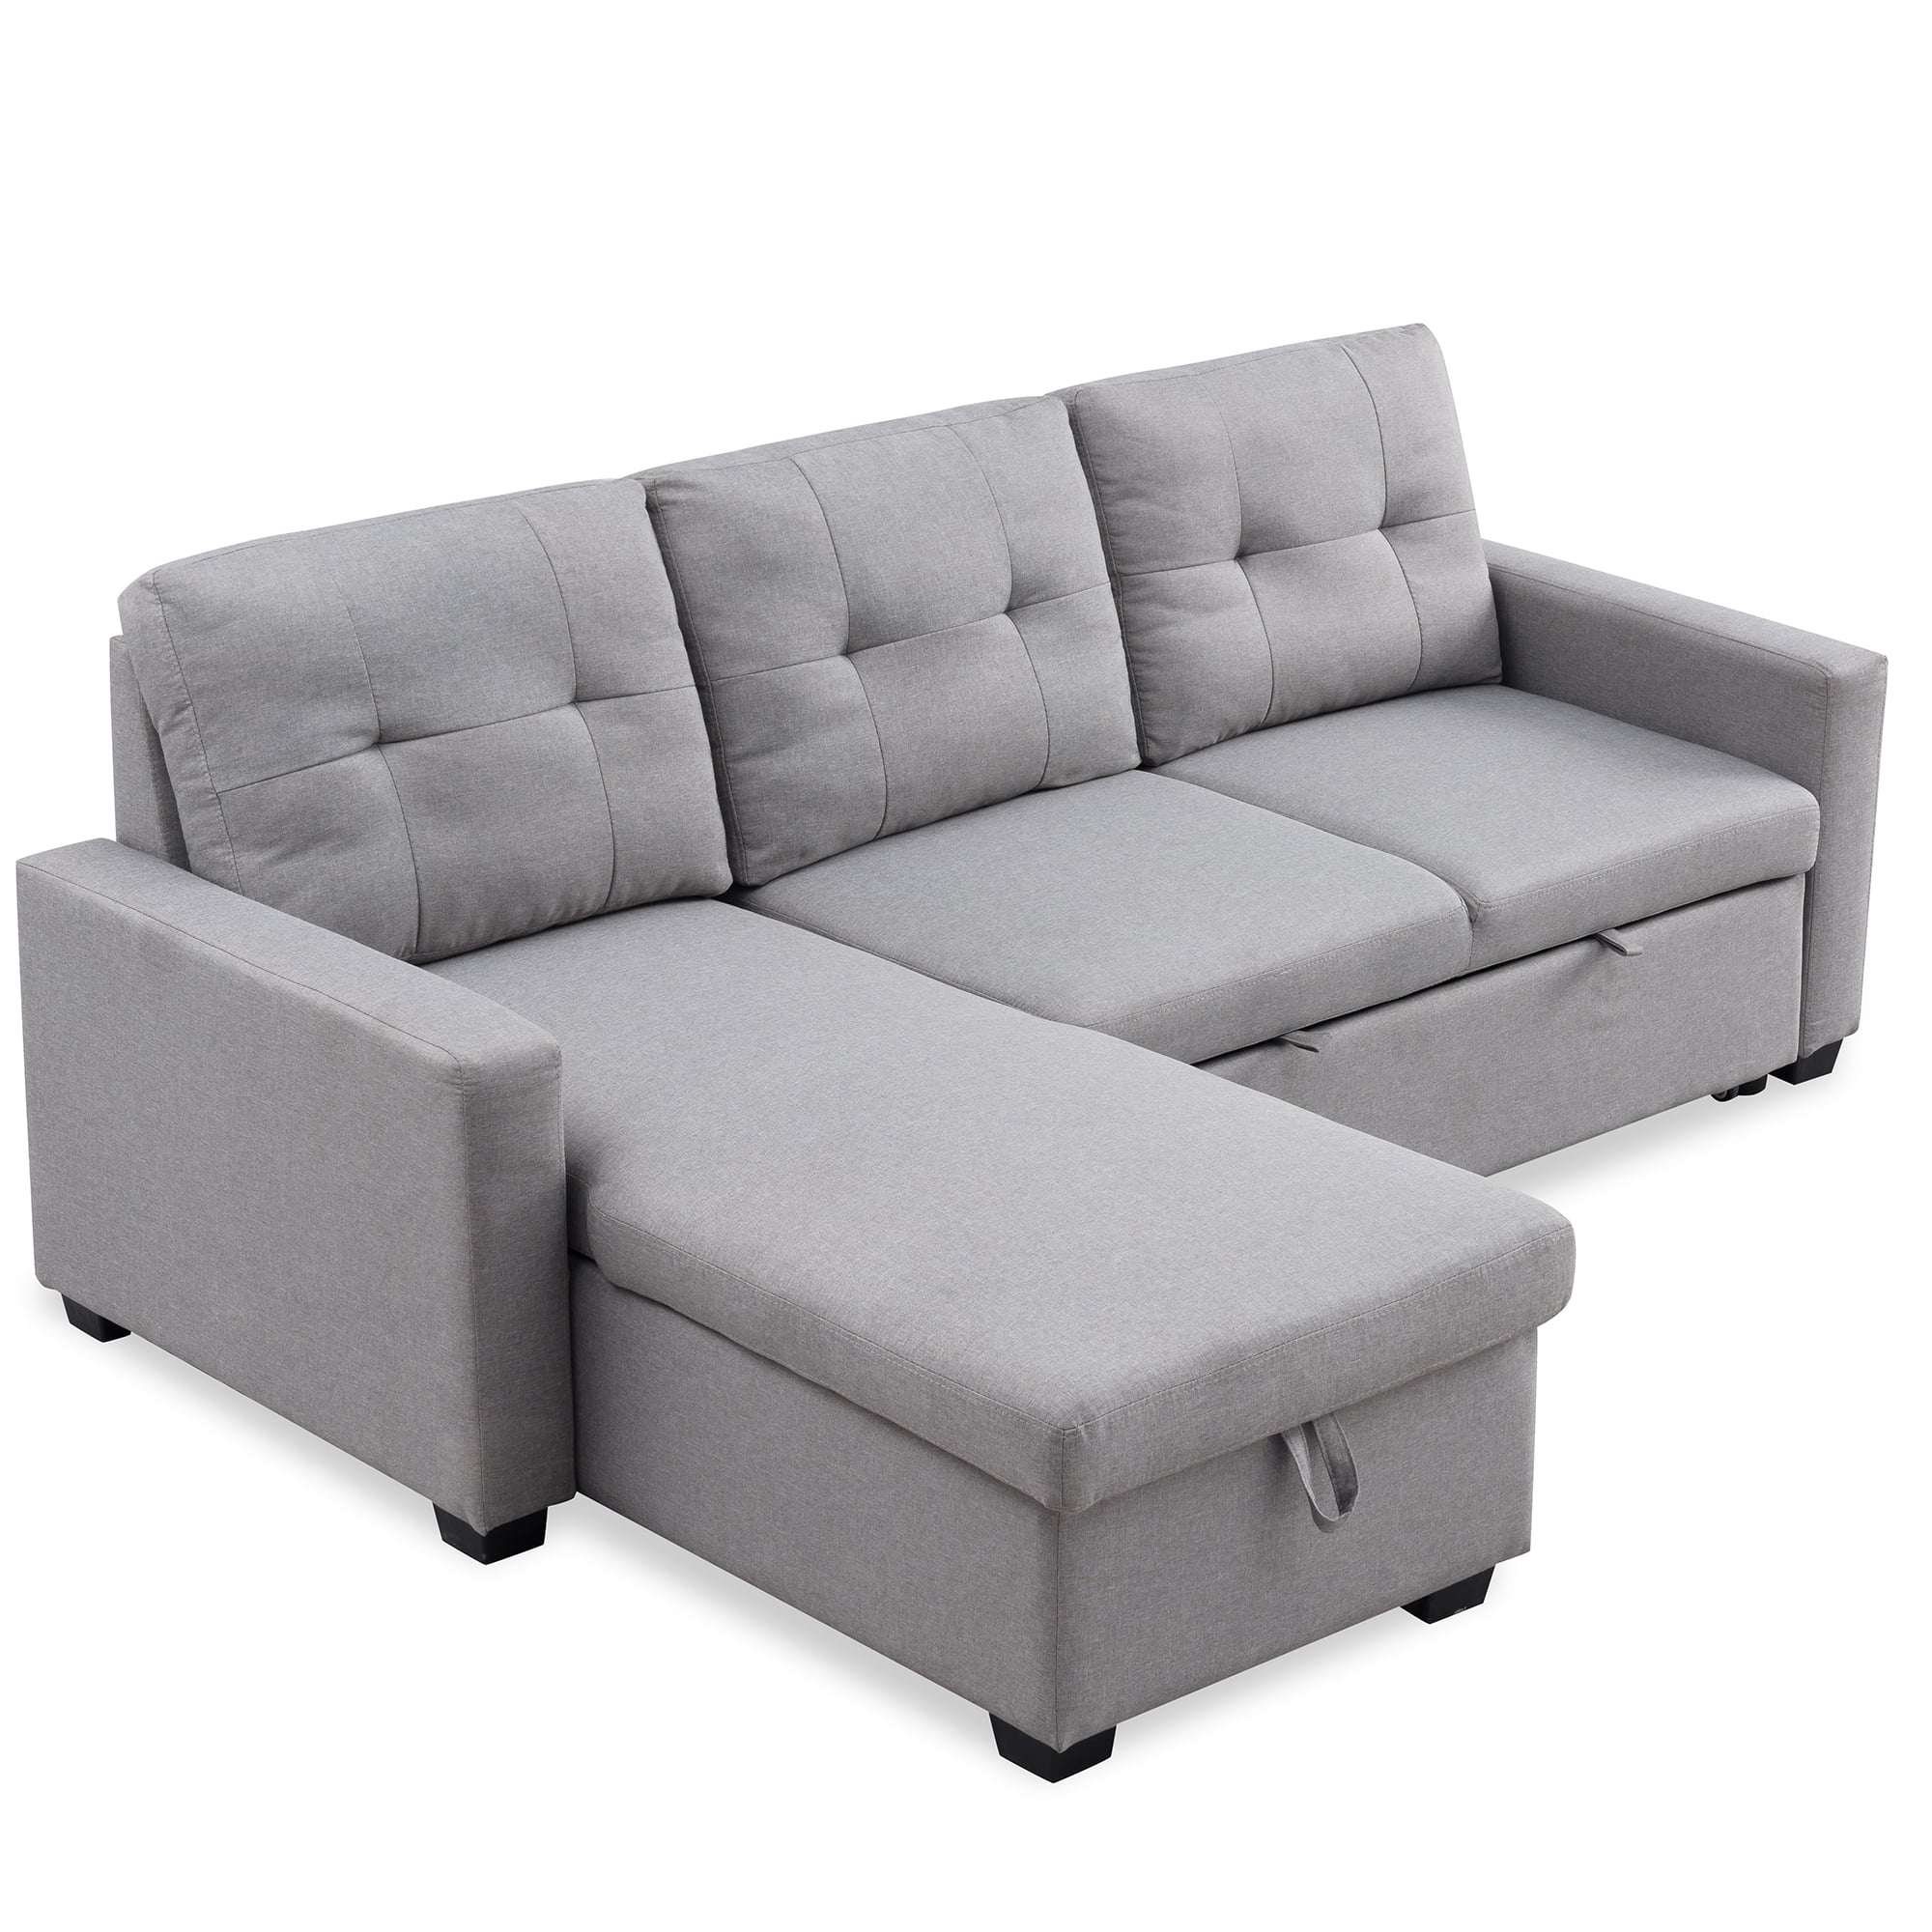 MidCentury Sectional Sofa with PullOut Sleeper, 82" x 60